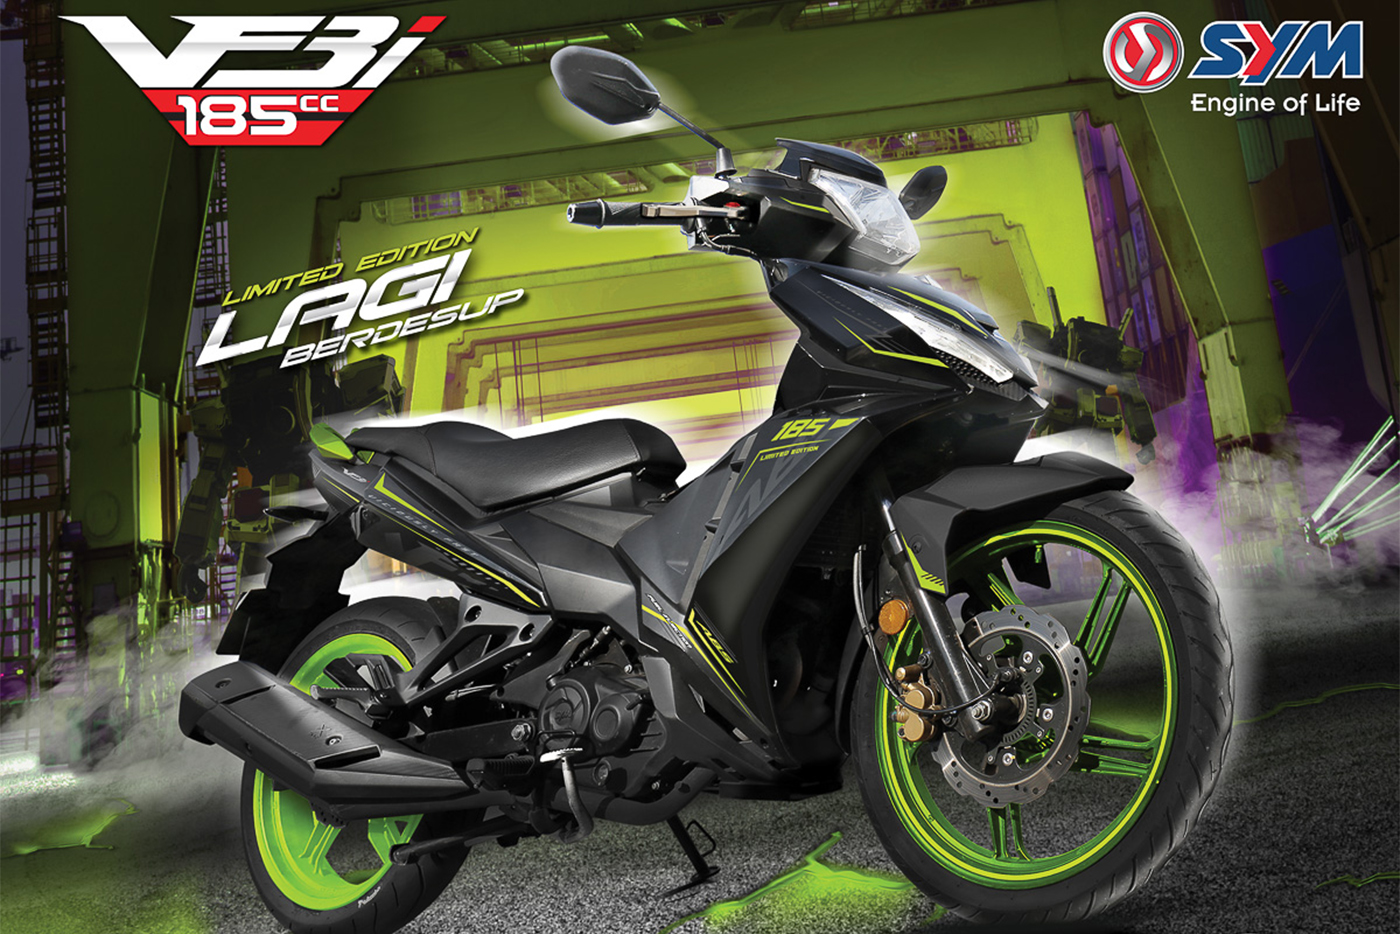 2020-sym-vf3i-limited-edition-le-launch-price-malaysia-185cc-super-moped-7.jpg